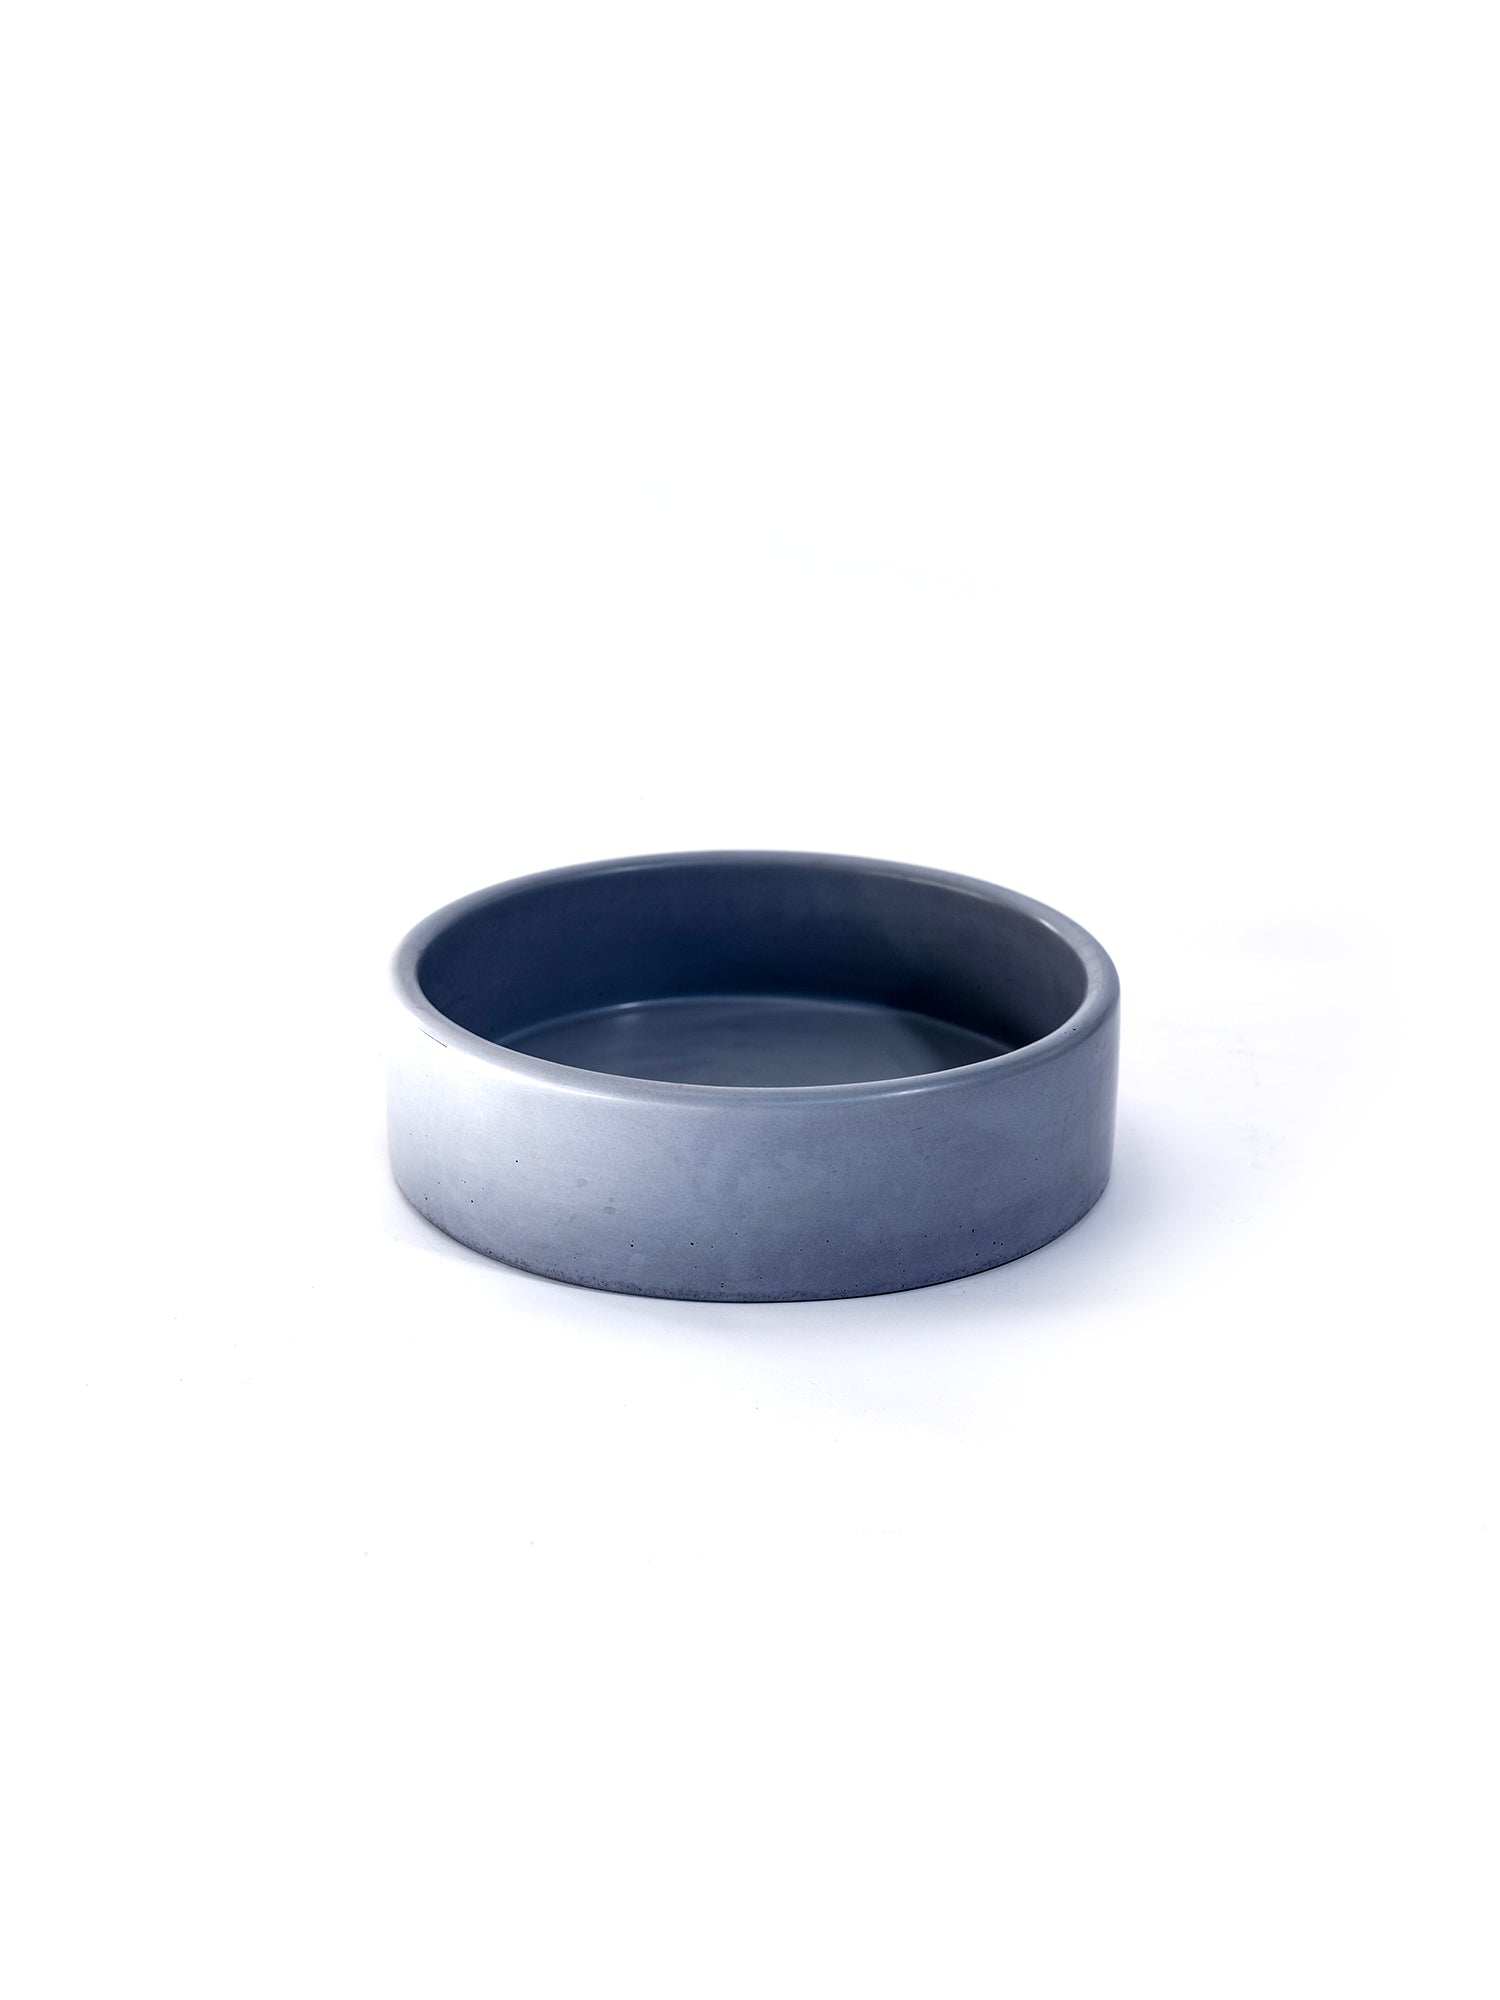 The Bowl Concrete Countertop Basin (Avail. in 14 Colours)